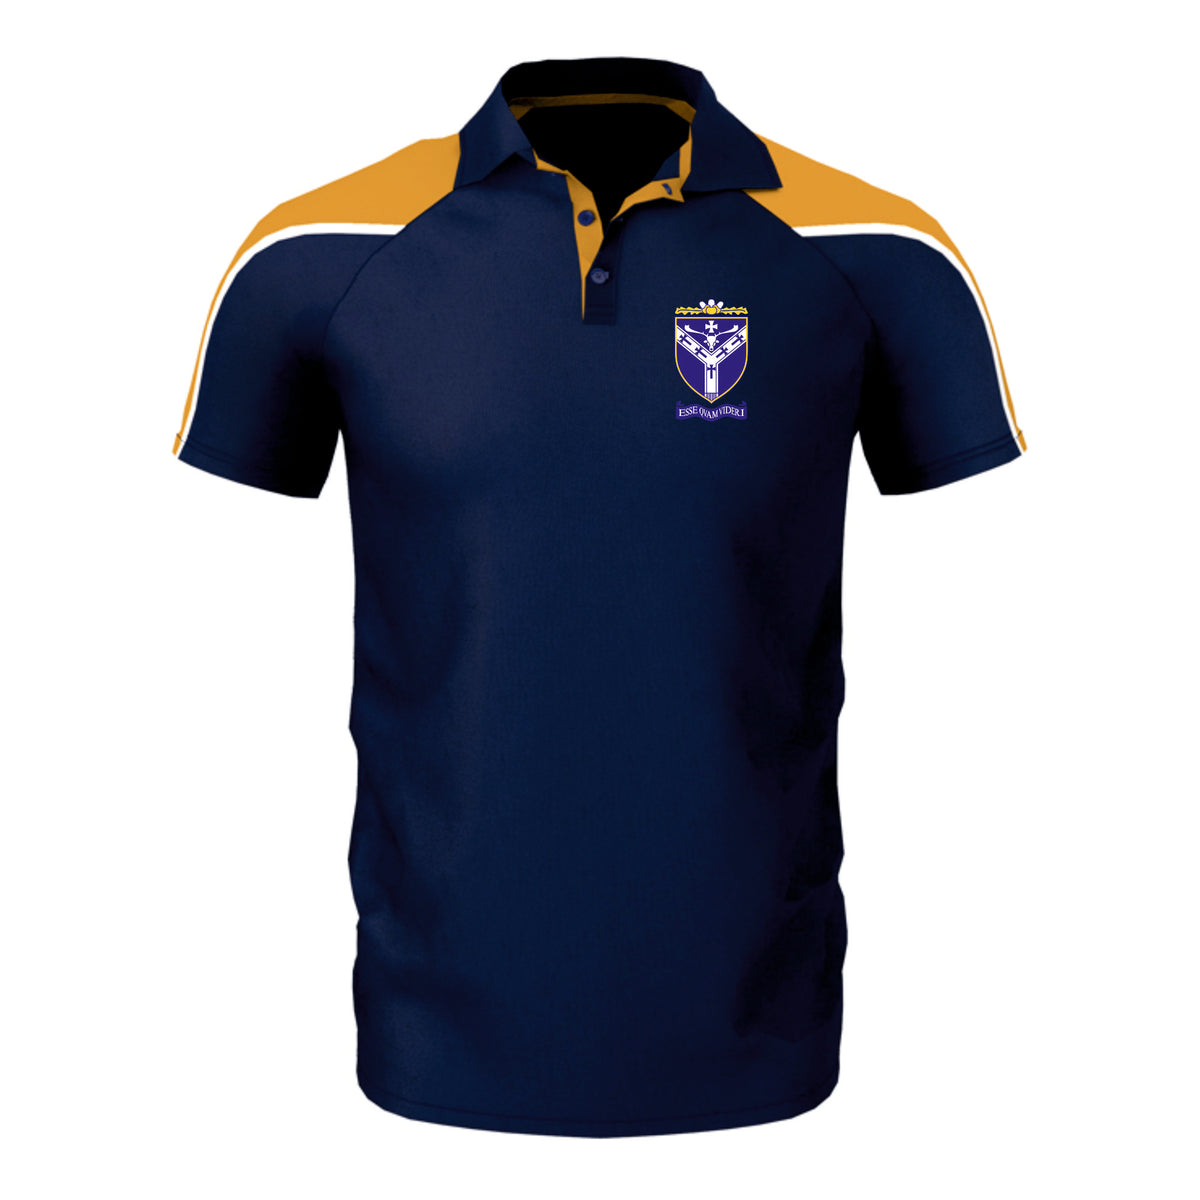 Forest School Unisex Polo